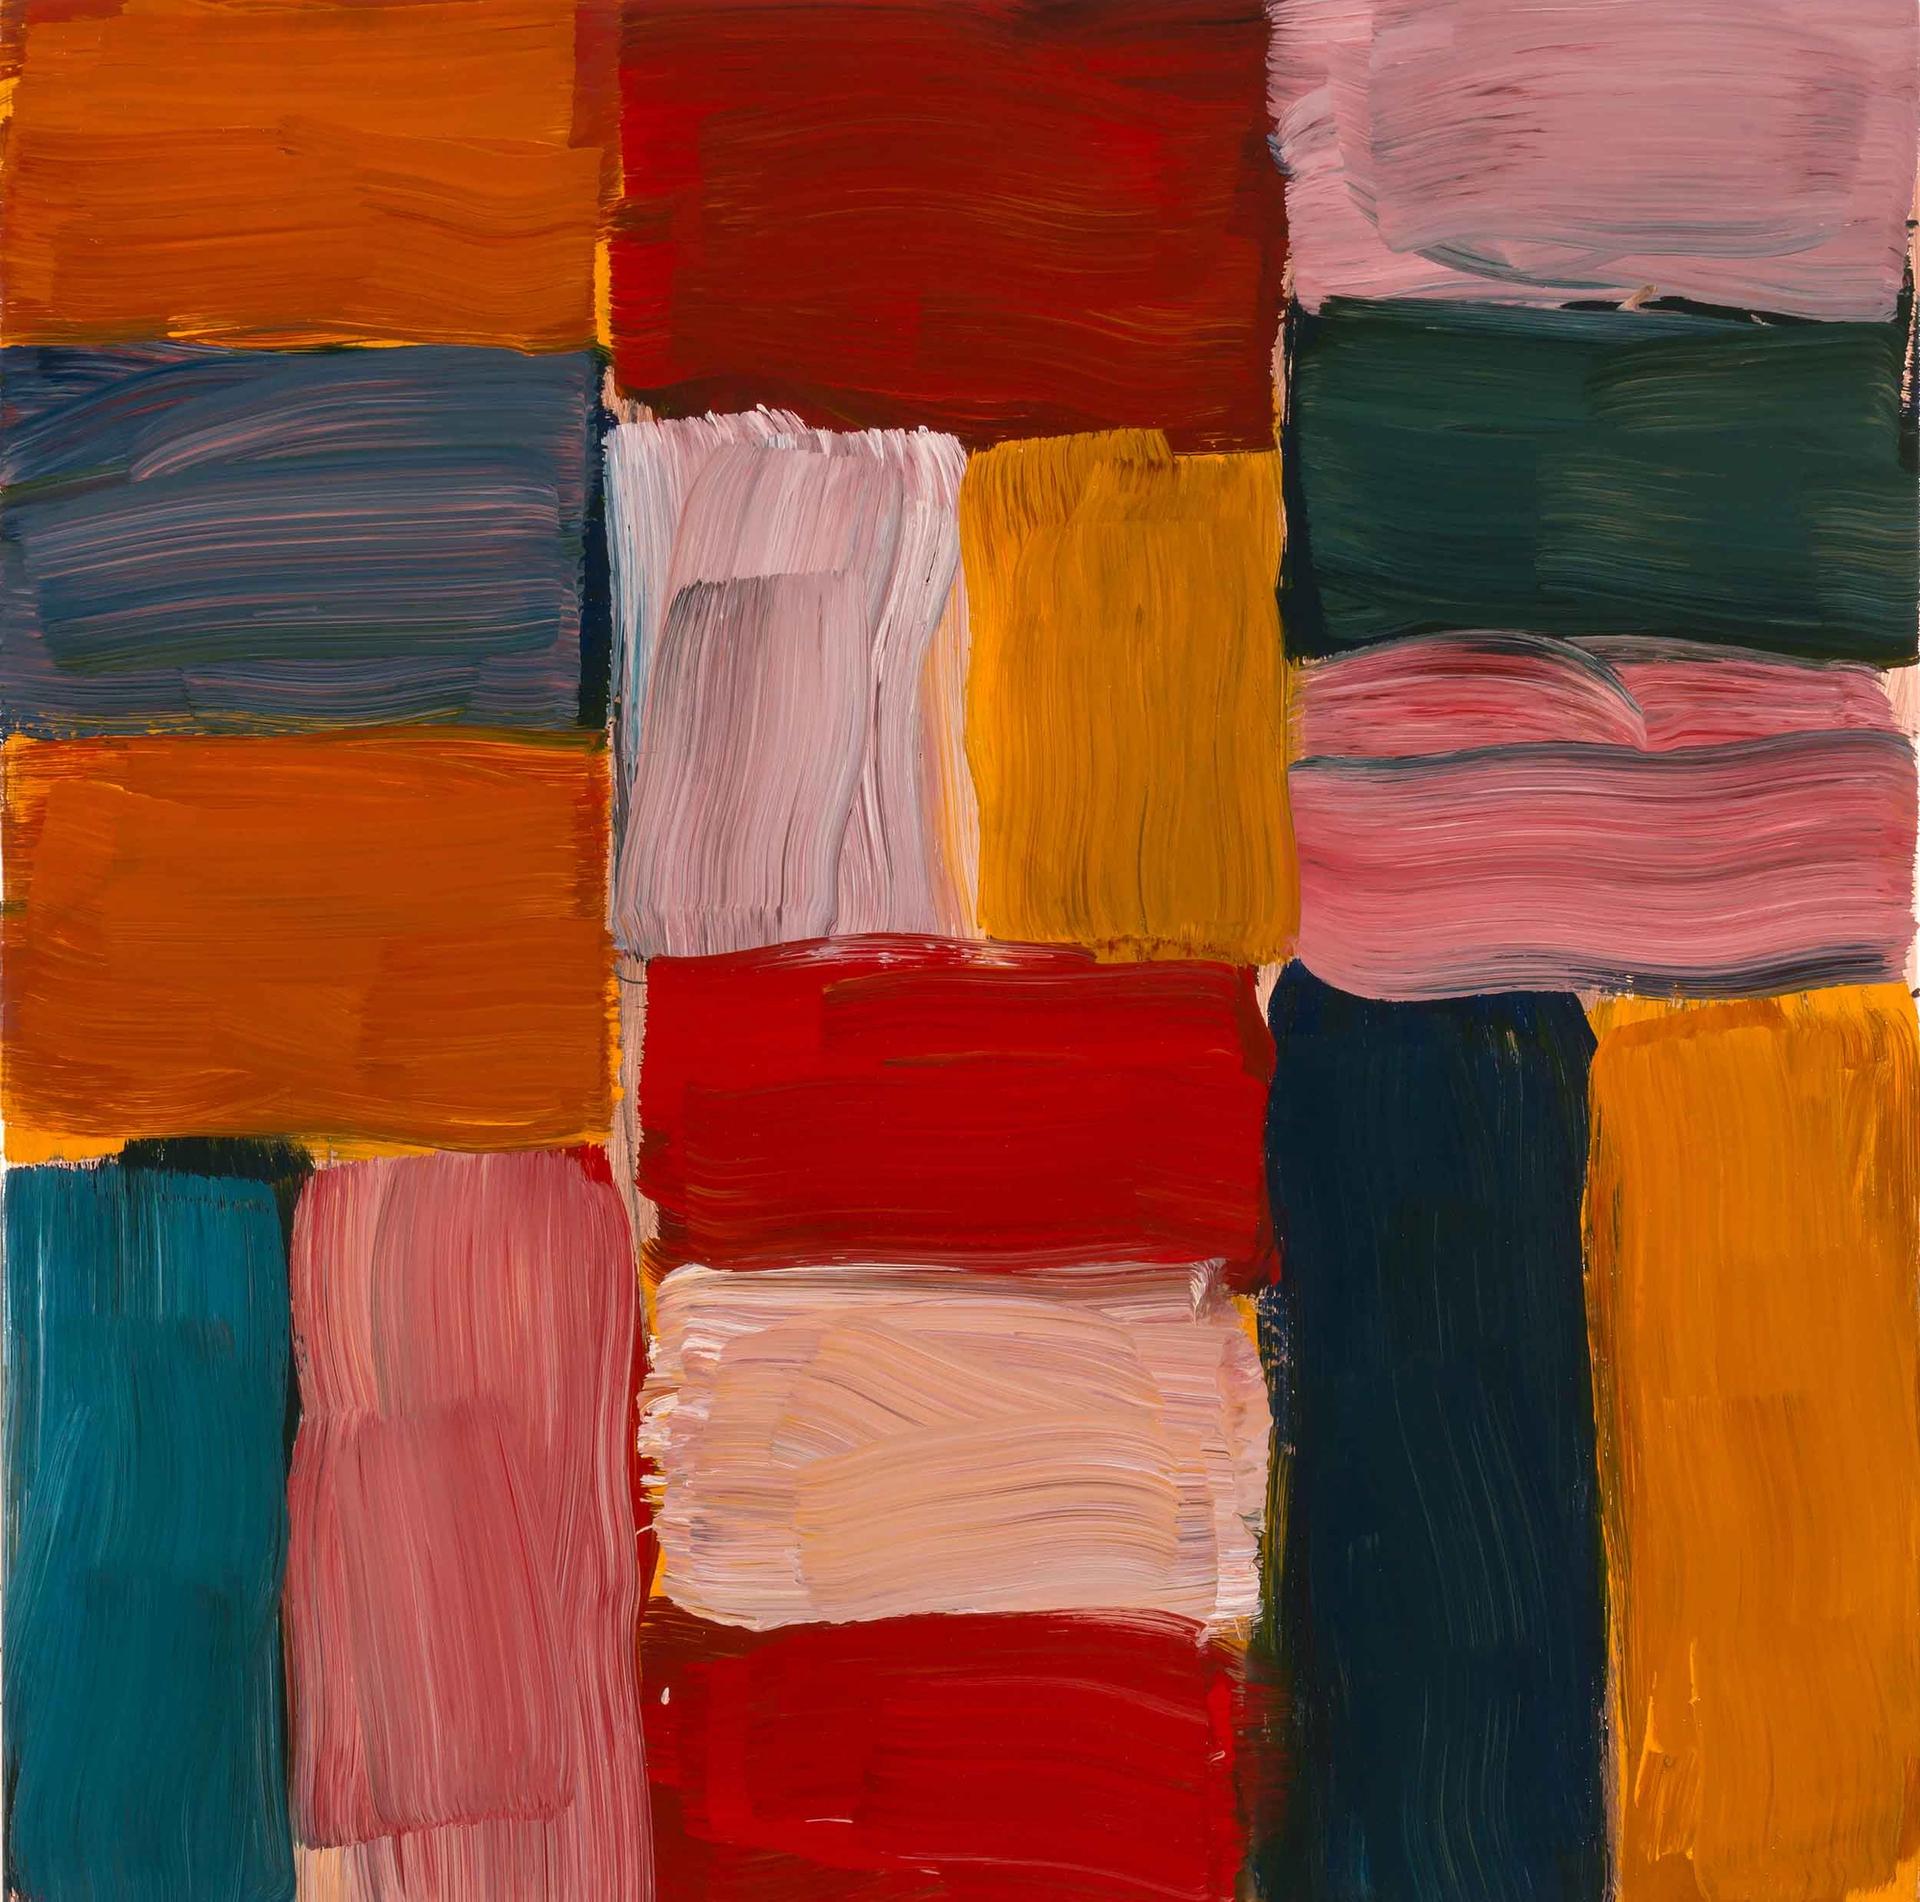 Sean Scully's oil on copper work Wall 30.6.16 (2016) will appear in the St Moritz show © Sean Scully Studio